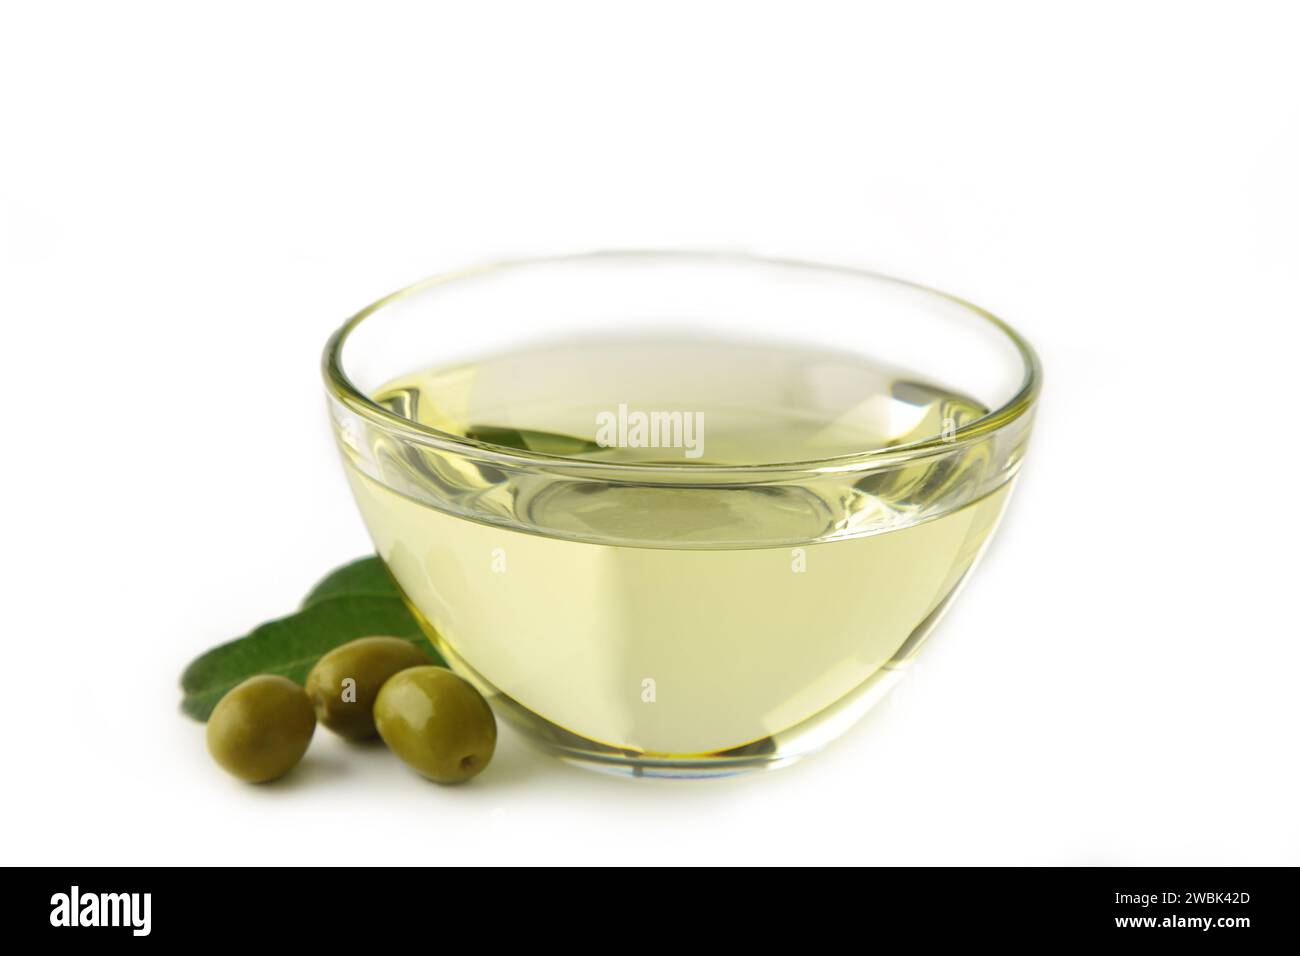 Bowl of fresh extra virgin olive oil and green olives with leaves isolated on white background. Stock Photo